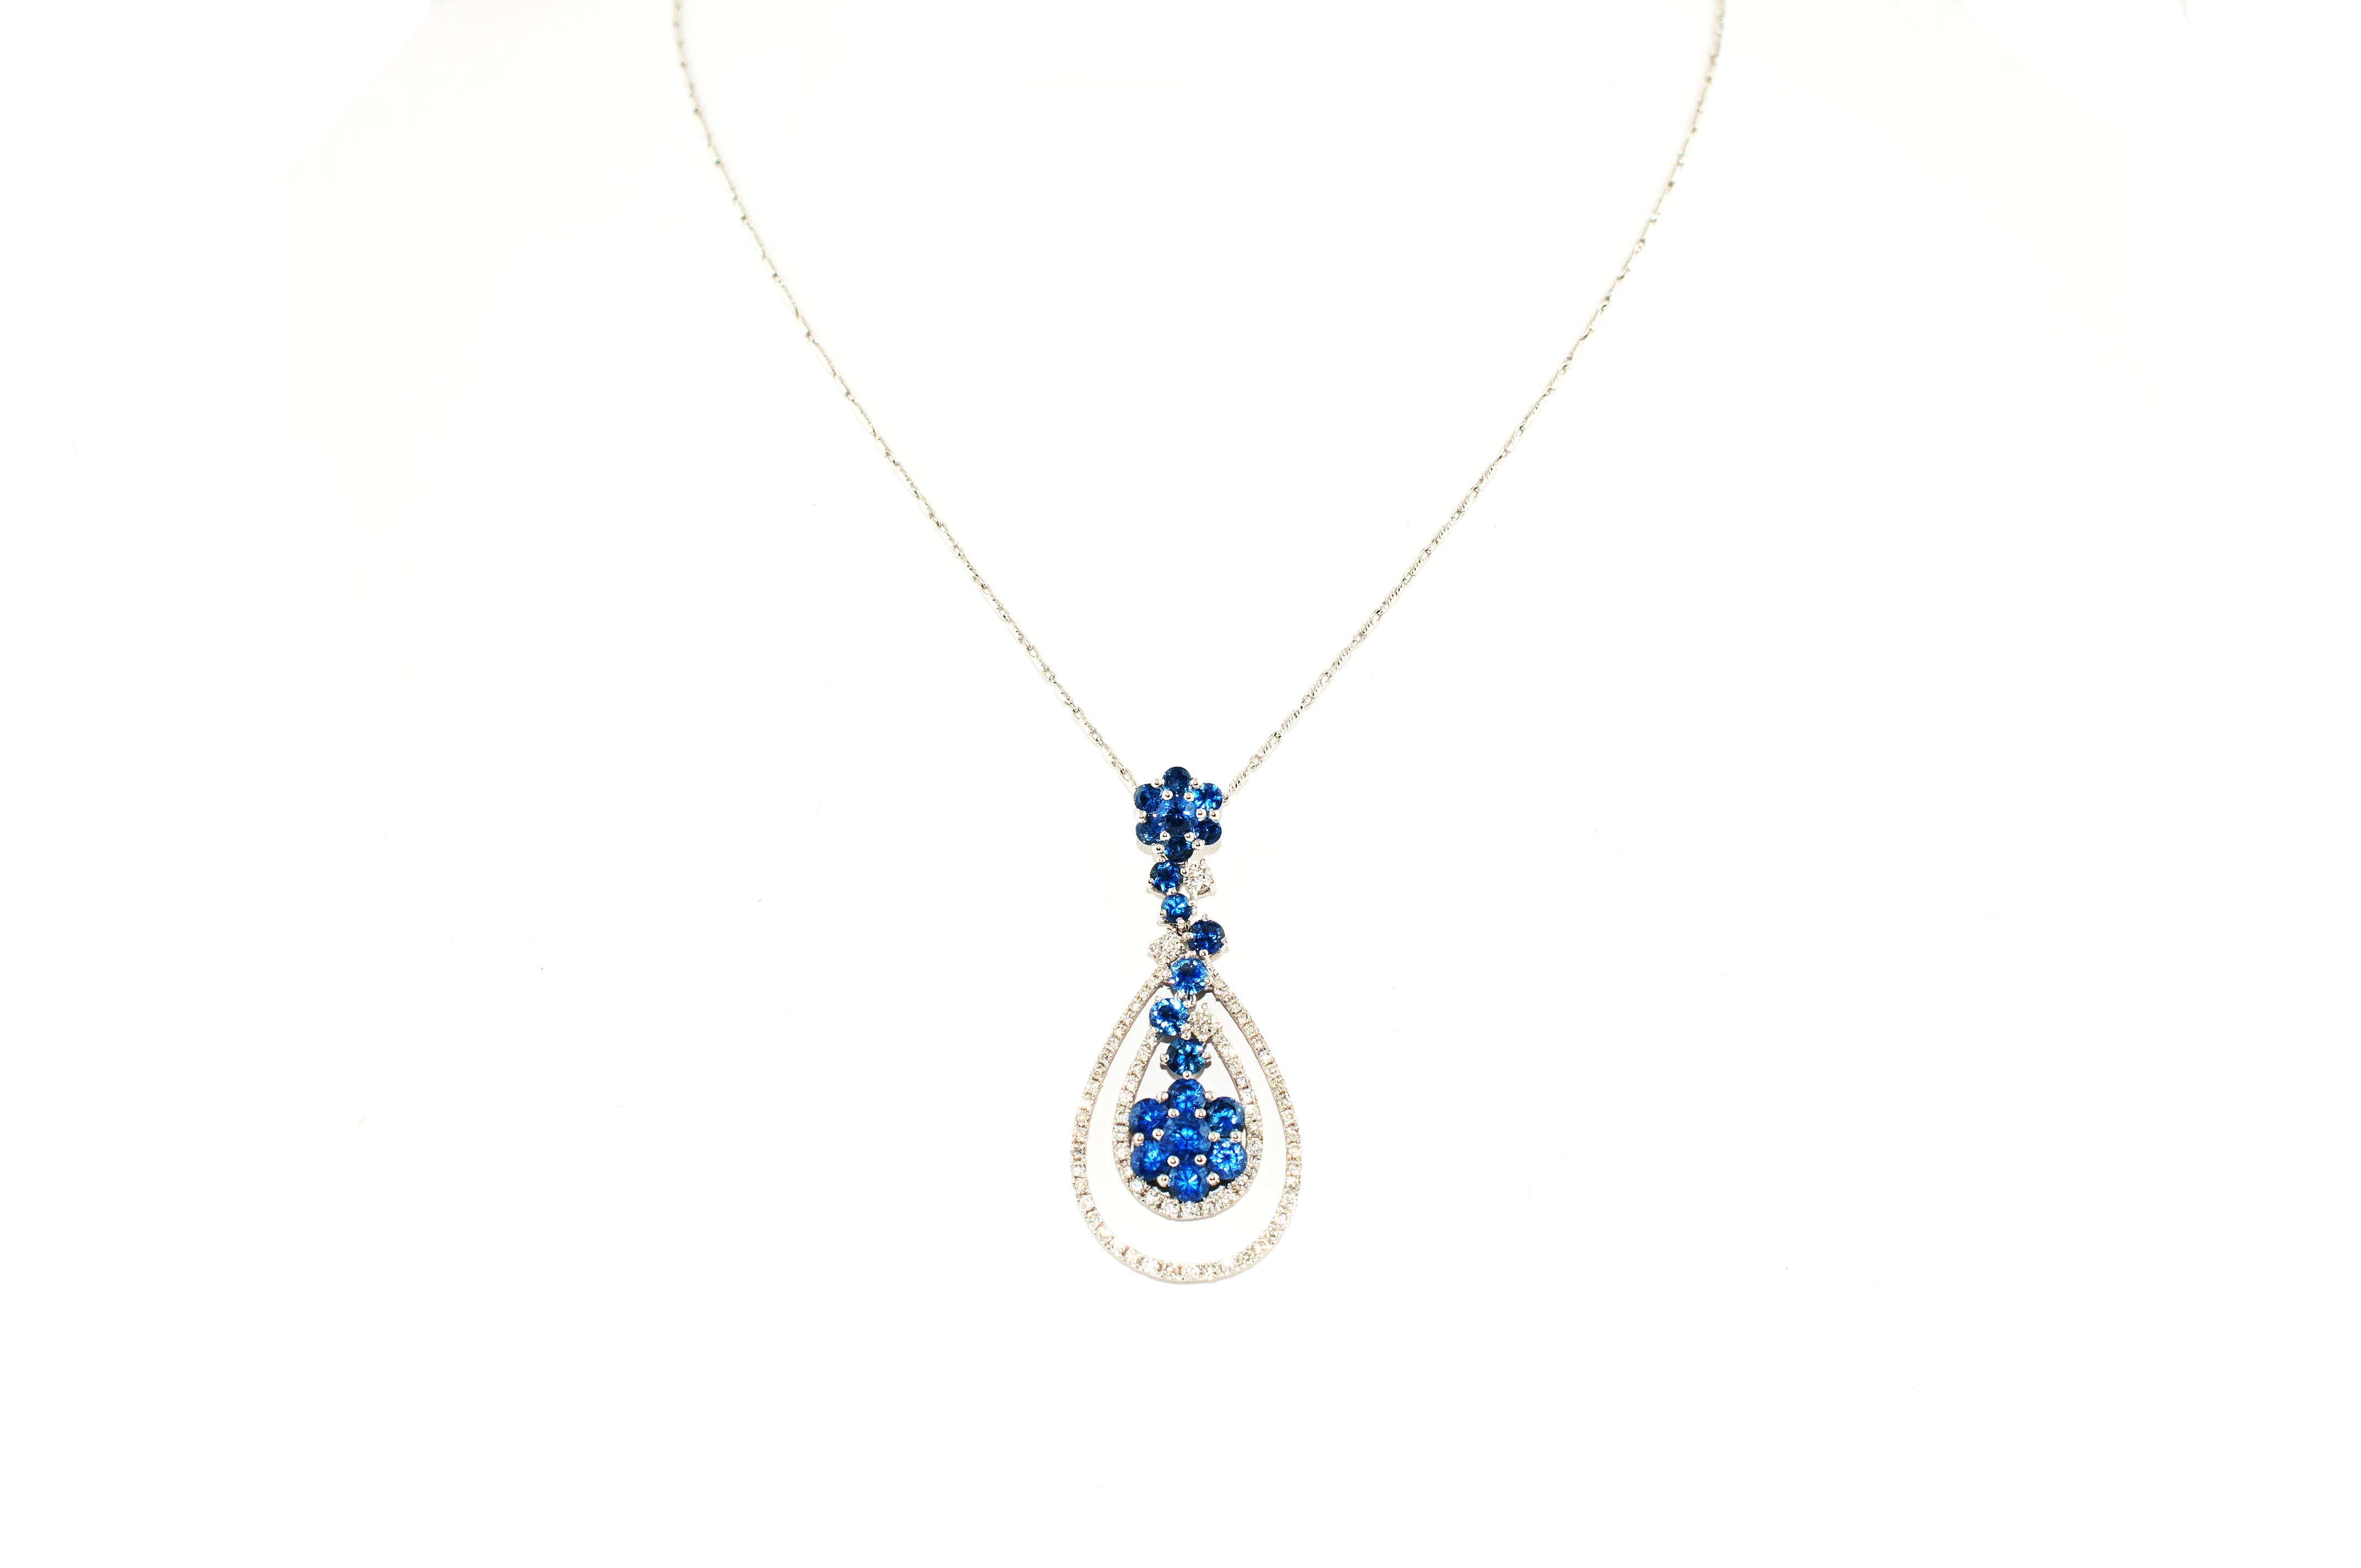 Sapphire and diamond pendant necklace in 14K white gold